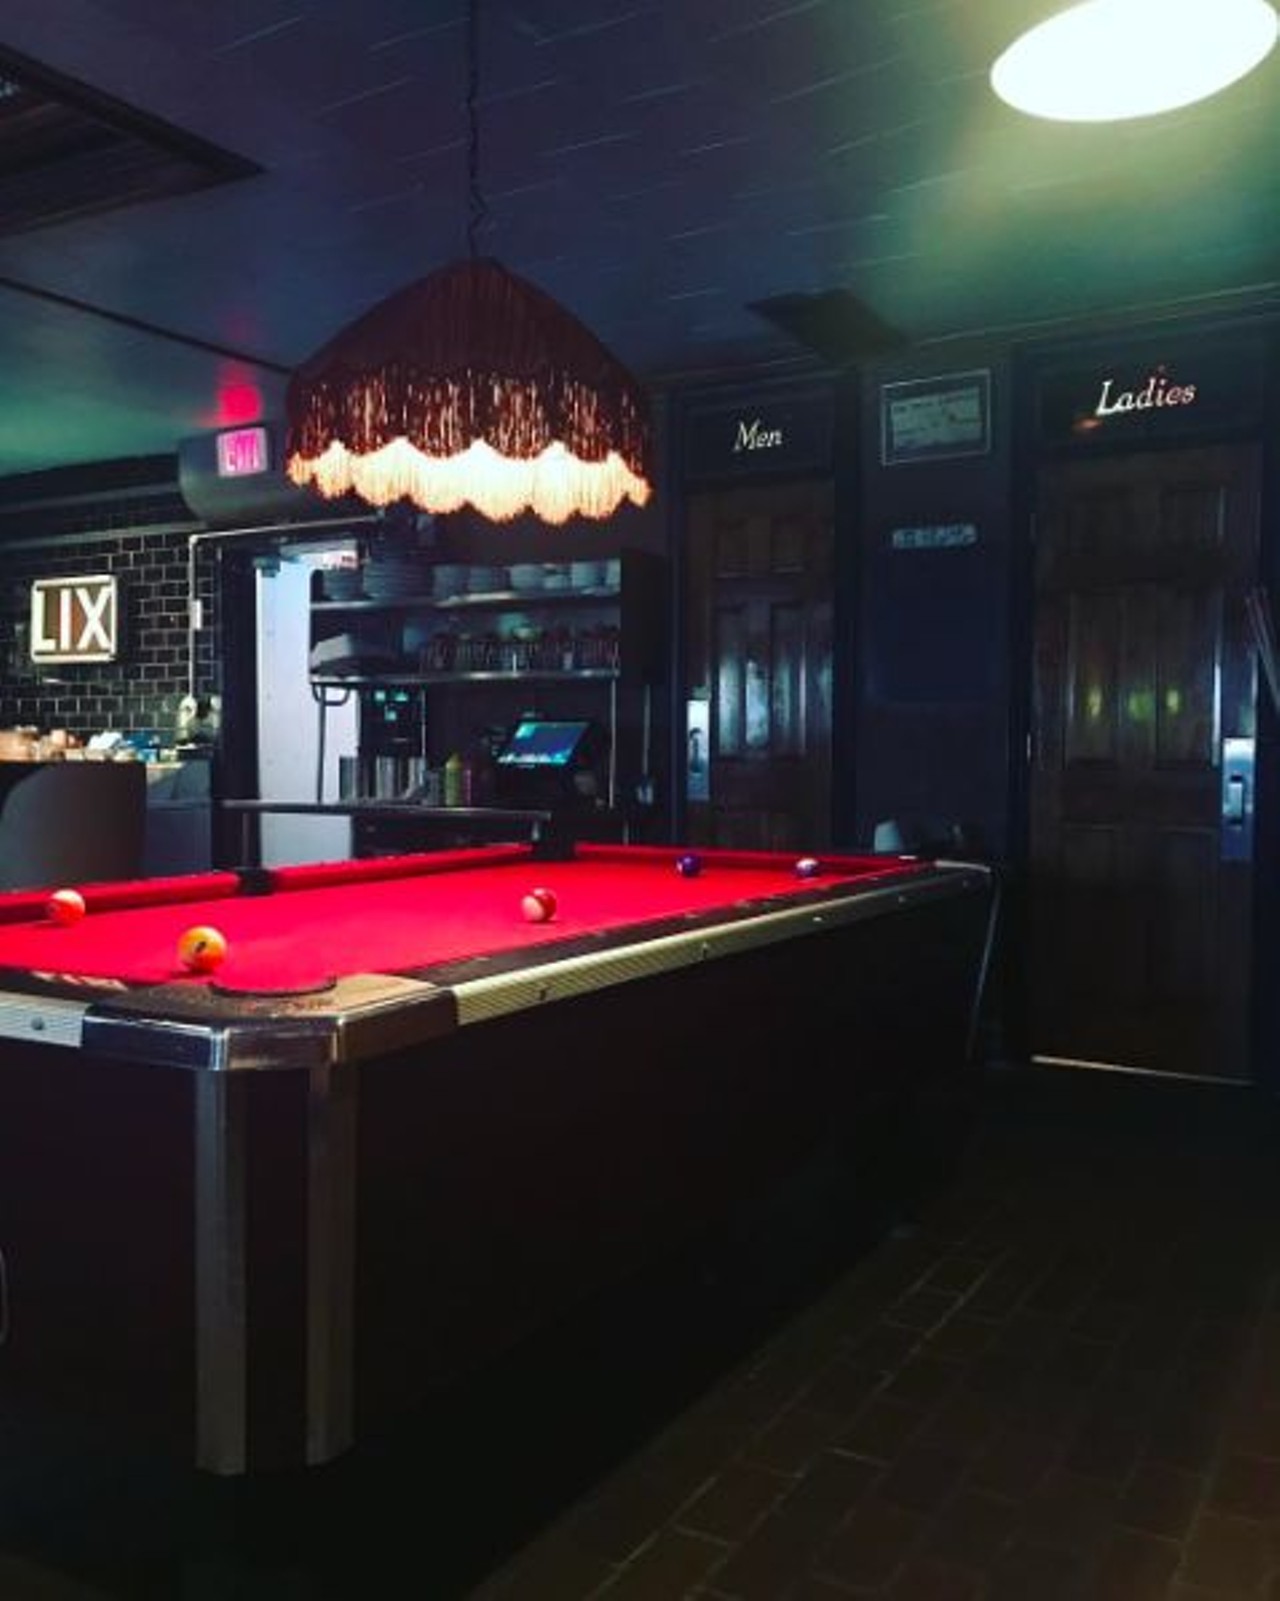 Bronx Bar
4476 2nd Ave., Detroit
This American restaurant and bar in Midtown doesn&#146;t have exotic mixed drinks, but it does have a pool table and cheap beer, which is all you should need to have a good time right? Photo via @queenteene